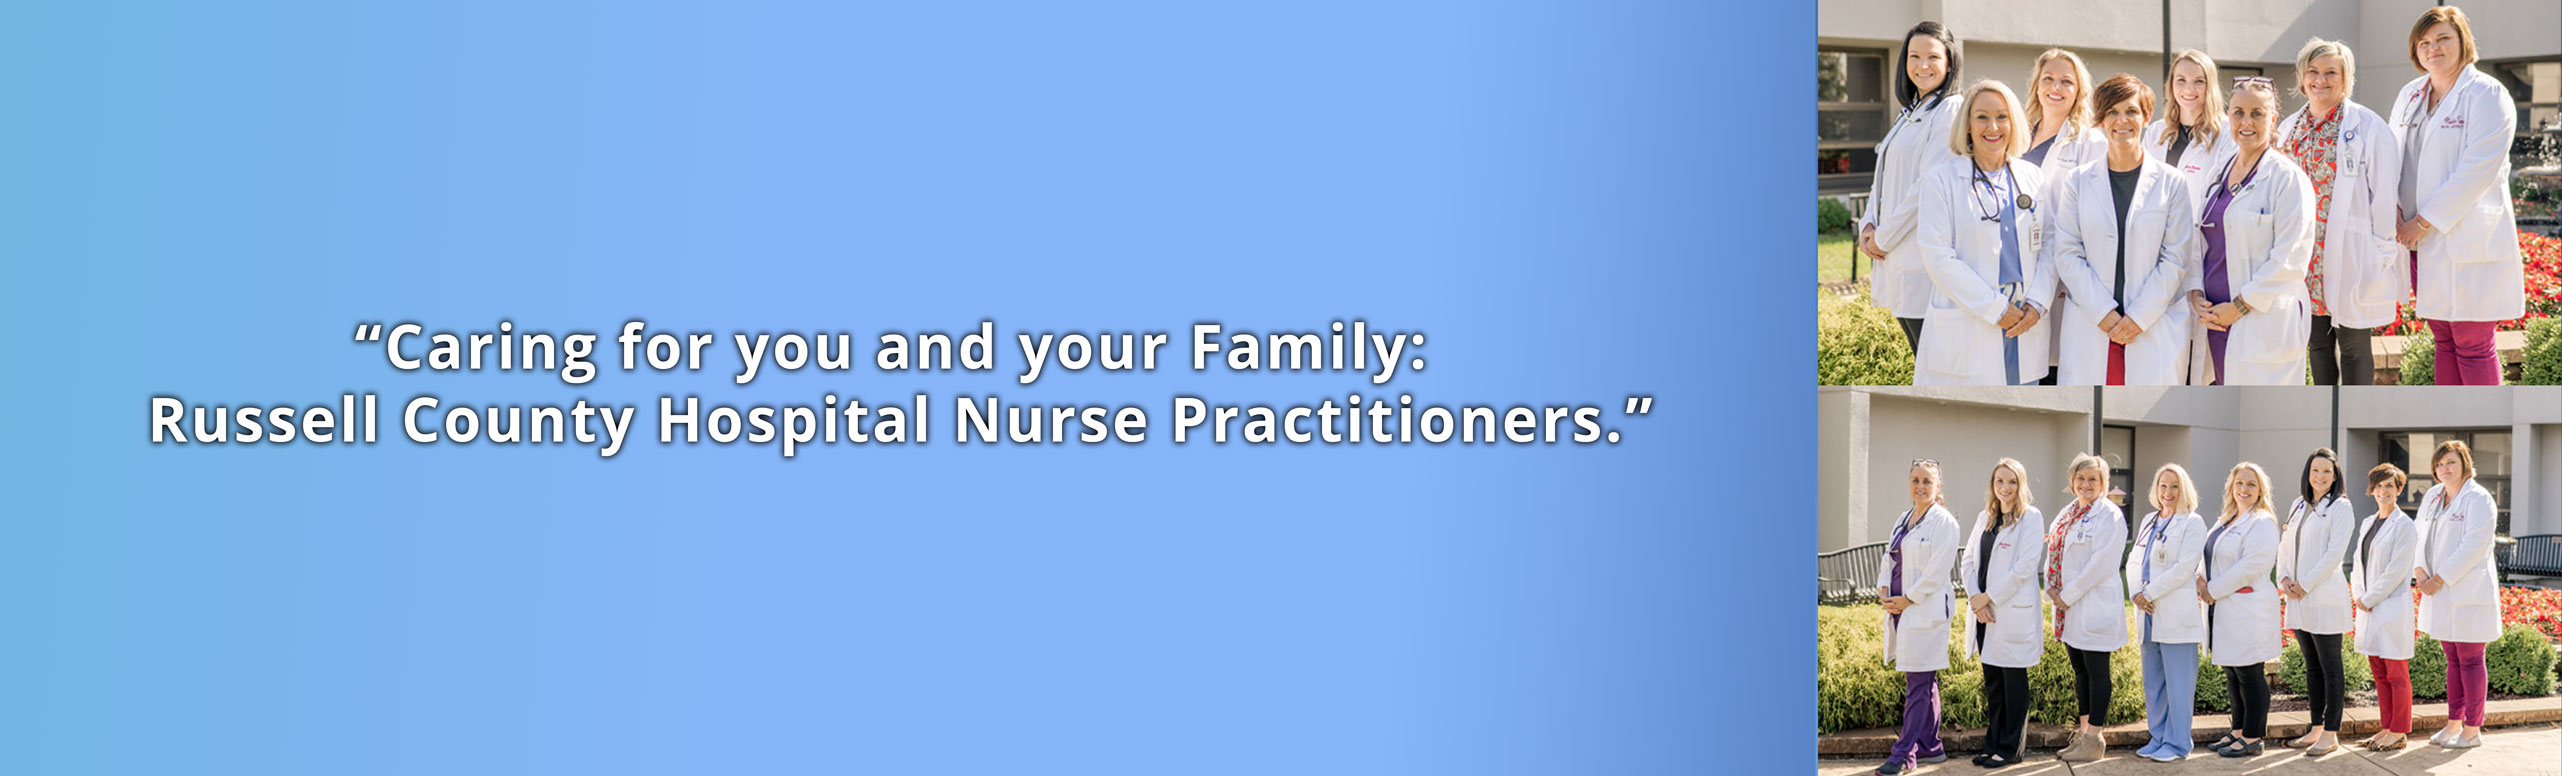 Banner Picture of Russell County Nurse Practitioners standing outside smiling. Banner says:

"Caring for you and your Family Russell County Hospital Nurse Practitioners."